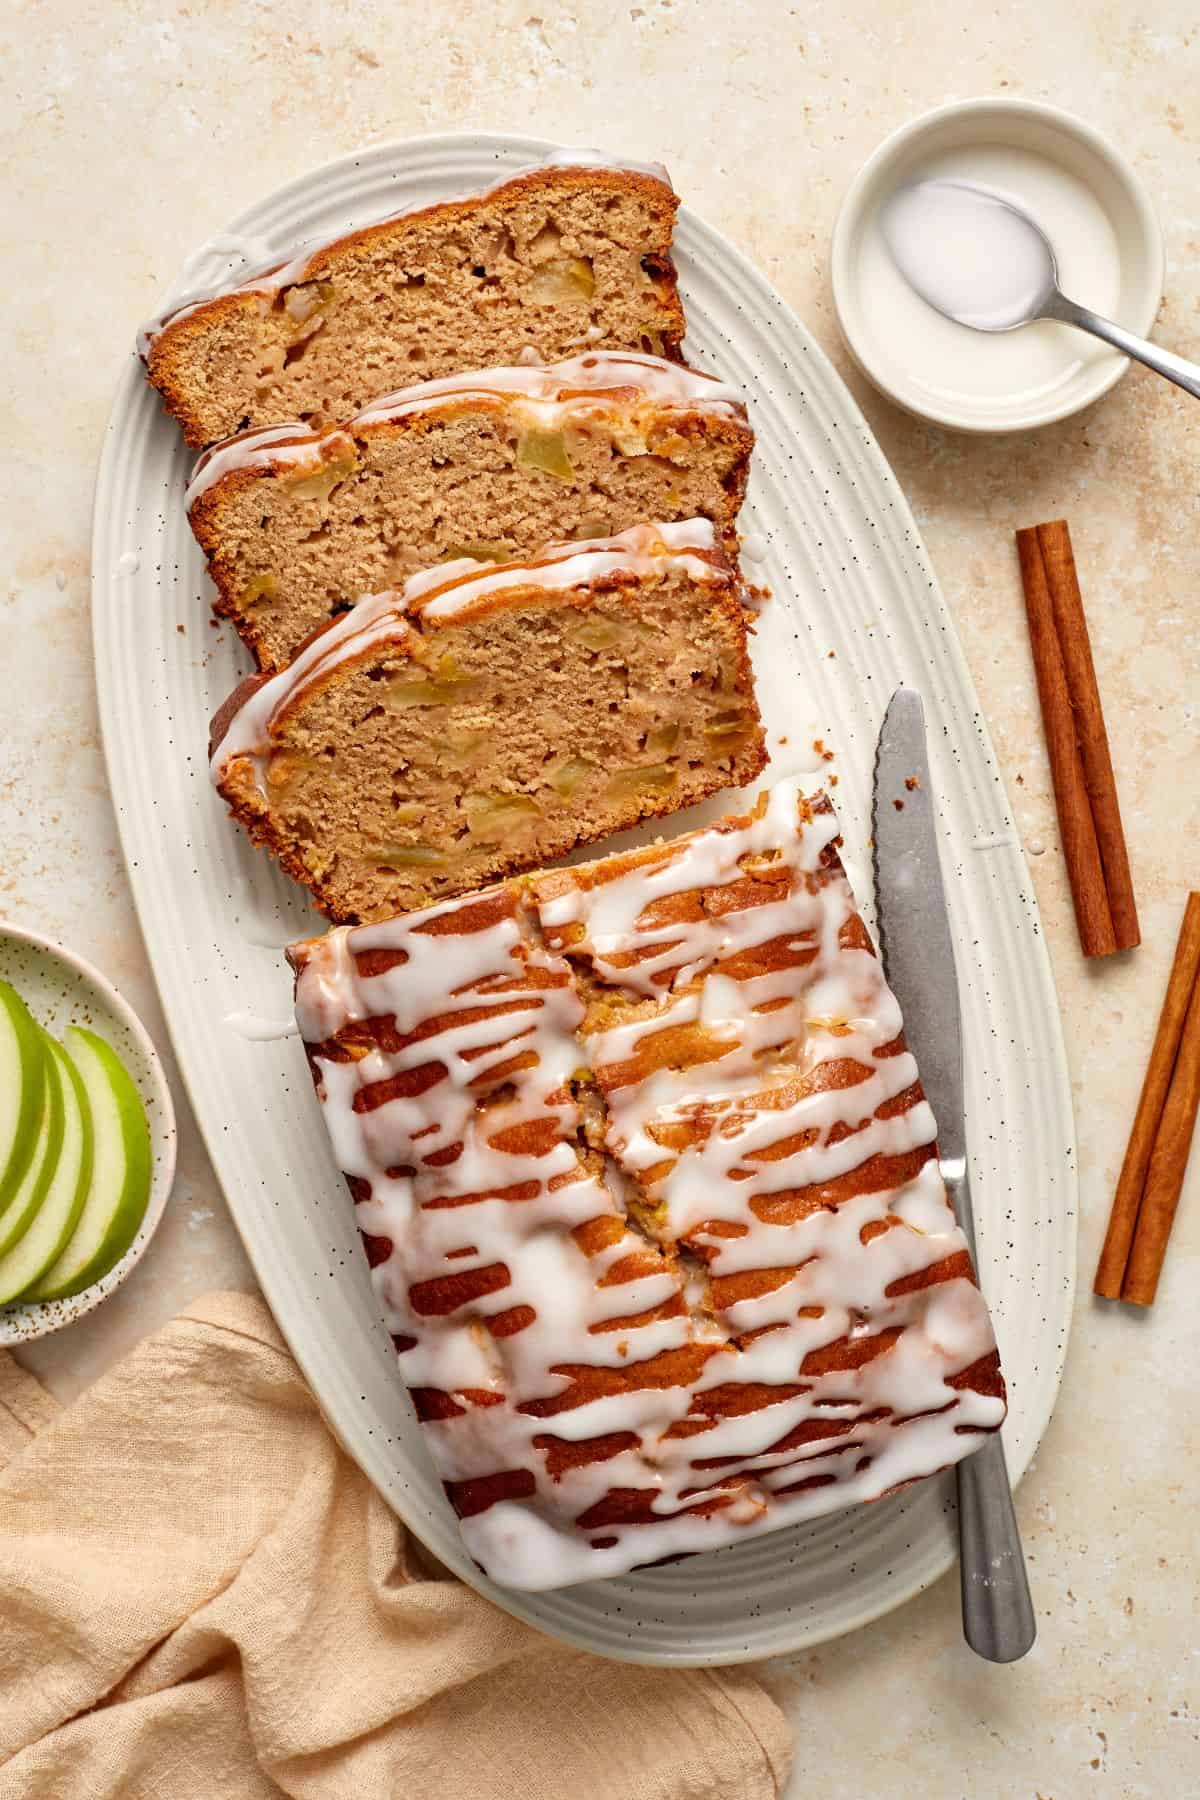 Apple Loaf Cake, with three slices cut, sitting on a white oval platter, with a knife on the side.